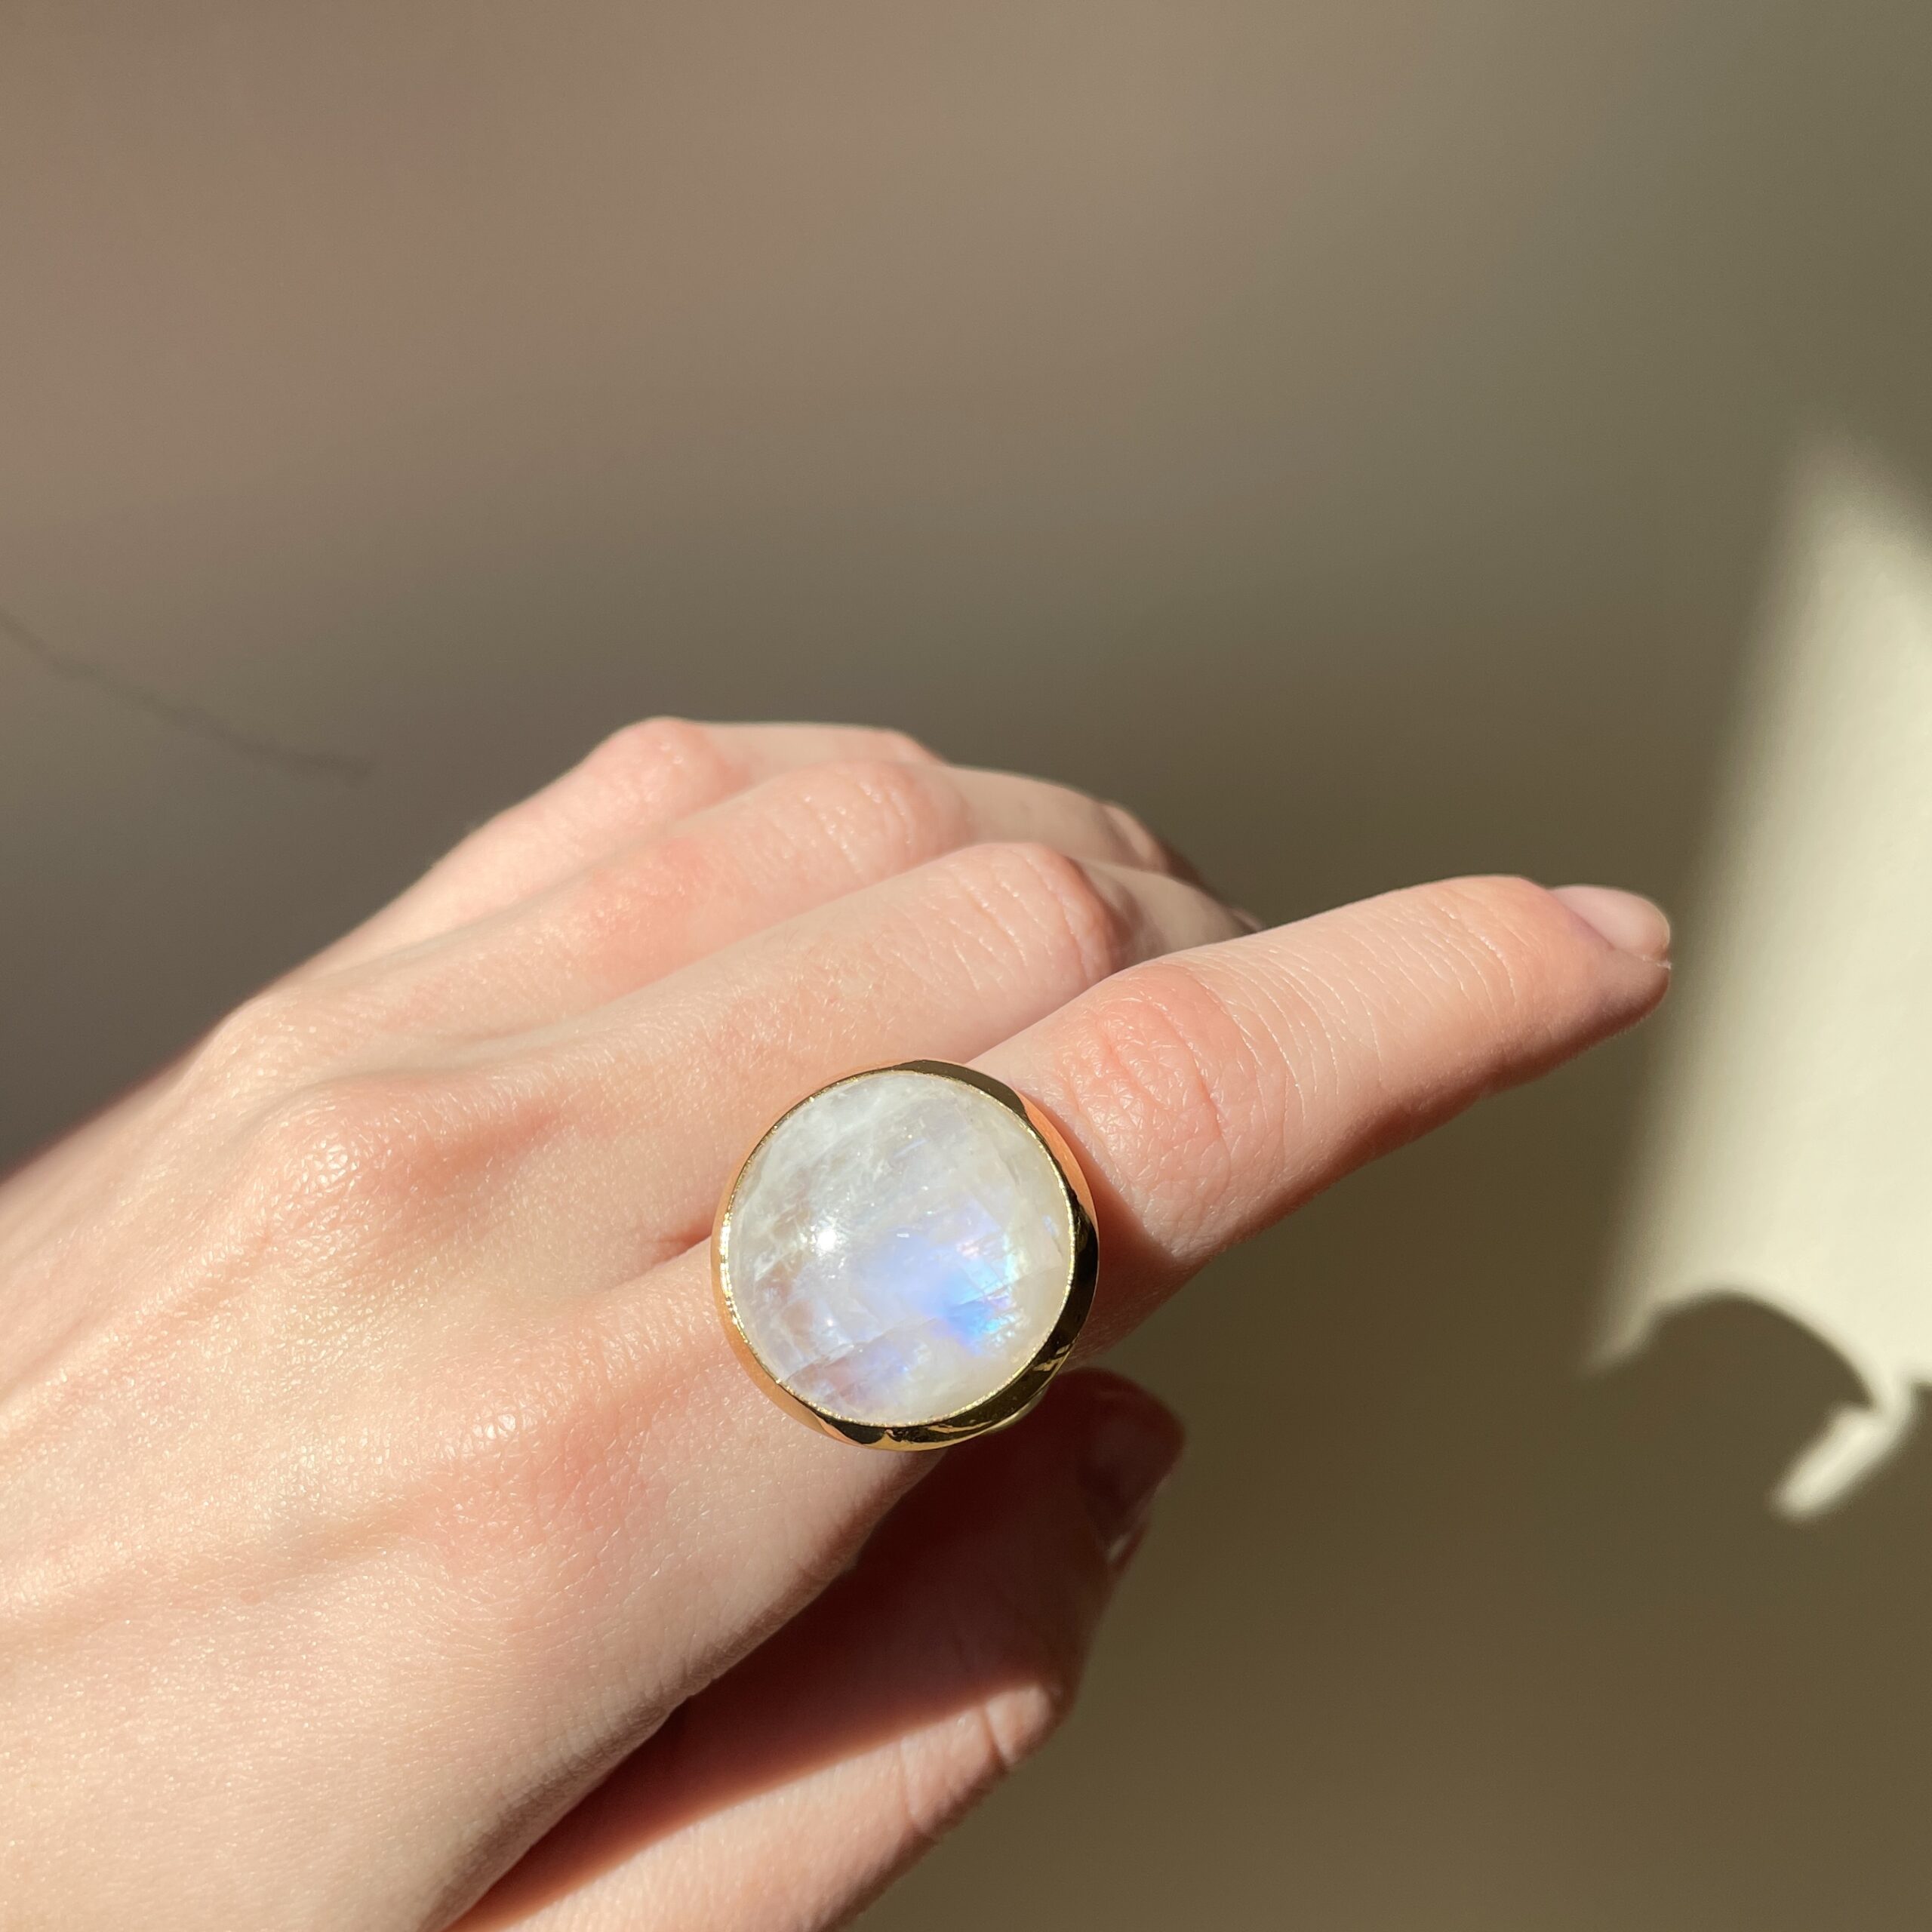 Stephen Estelle Sterling Silver with Yellow Gold Vermeil Rainbow Moonstone Ring